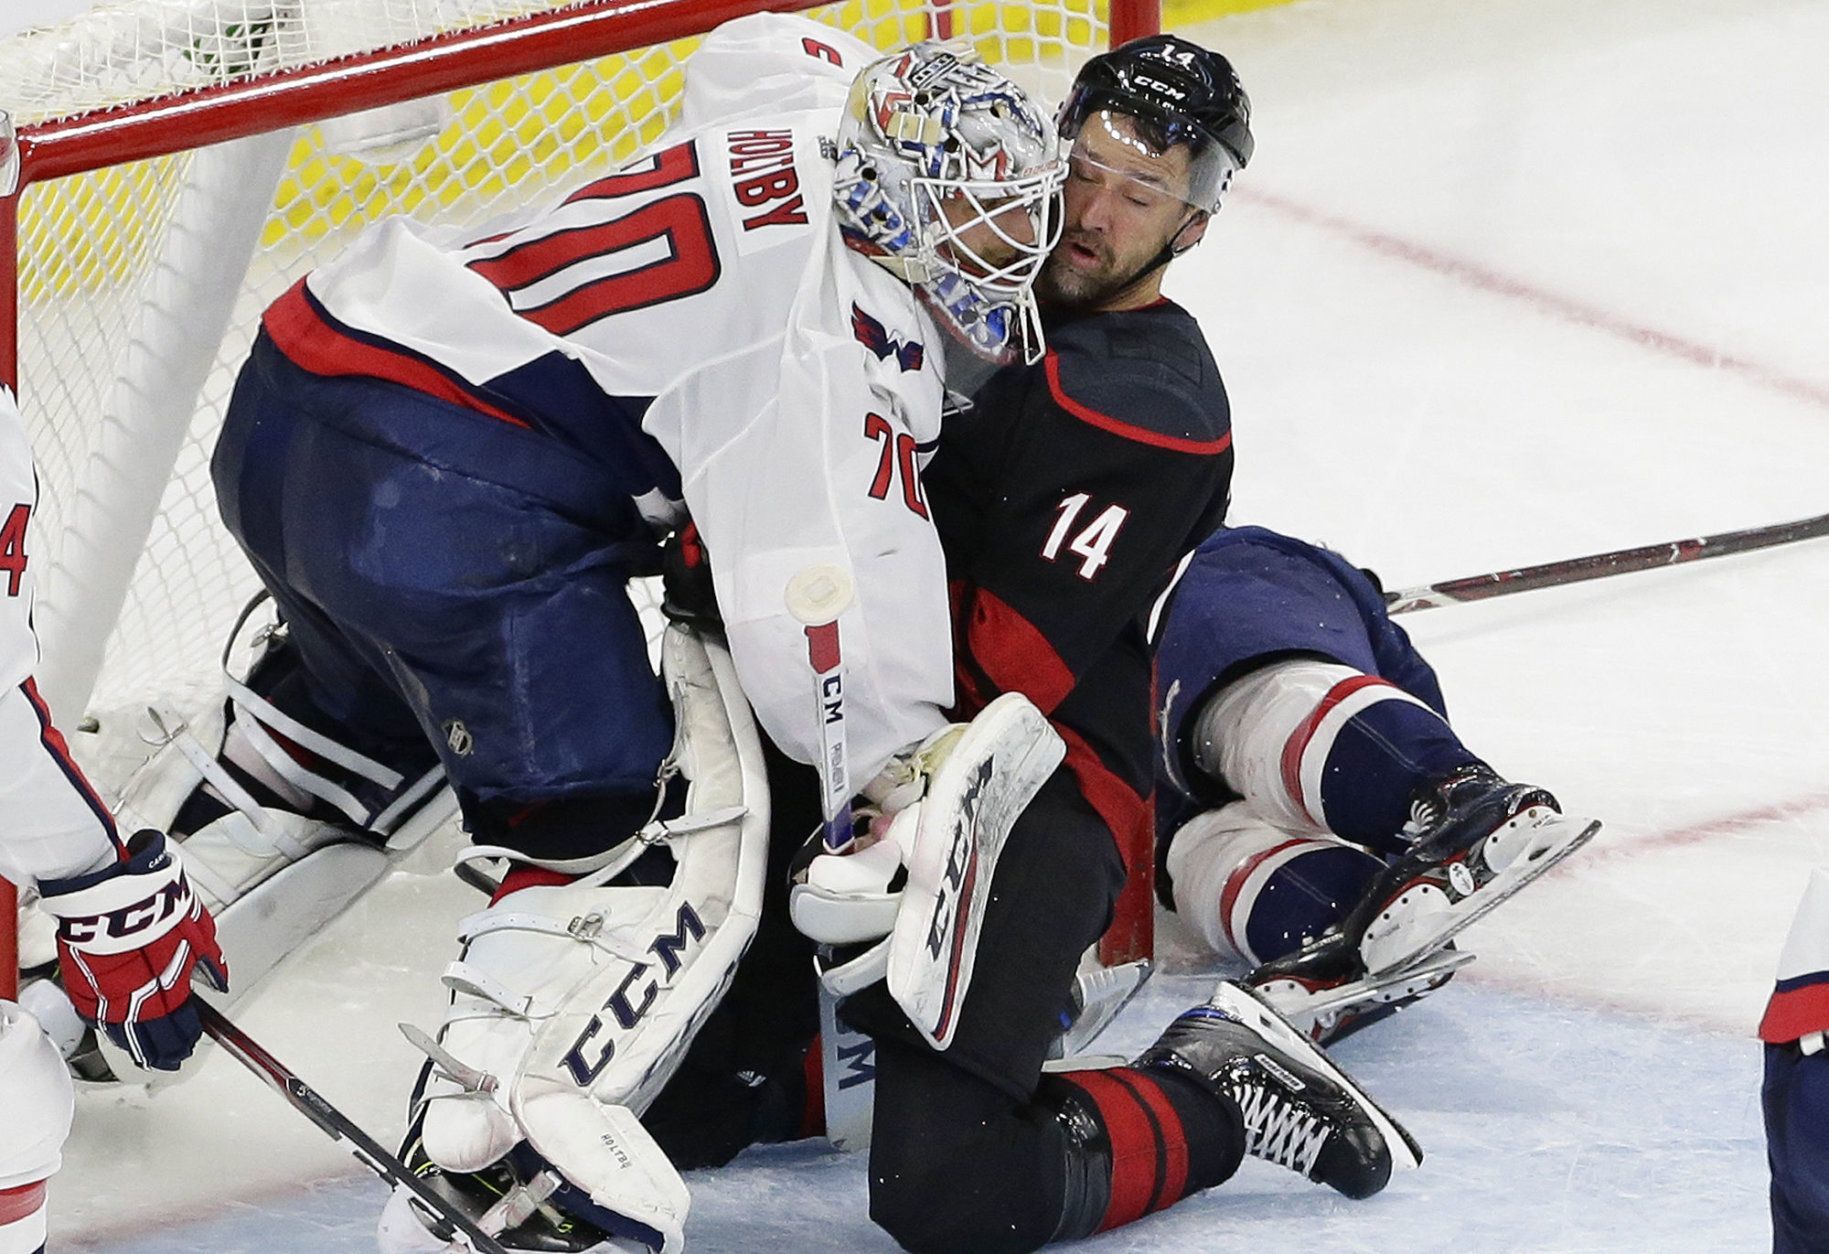 Carolina Hurricanes' Justin Williams (14) collides with Washington Capitals goalie Braden Holtby (70) during the second period of Game 6 of an NHL hockey first-round playoff series in Raleigh, N.C., Monday, April 22, 2019. (AP Photo/Gerry Broome)